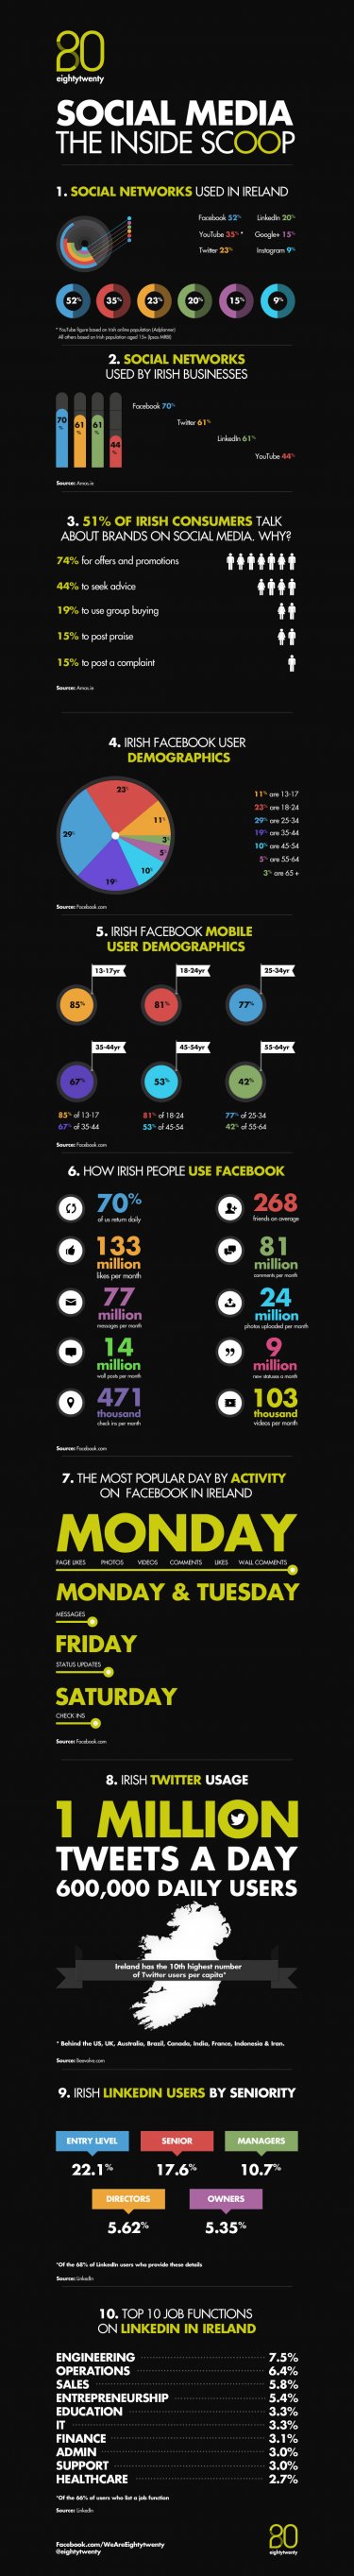 How the Irish use Twitter, Facebook and Google+